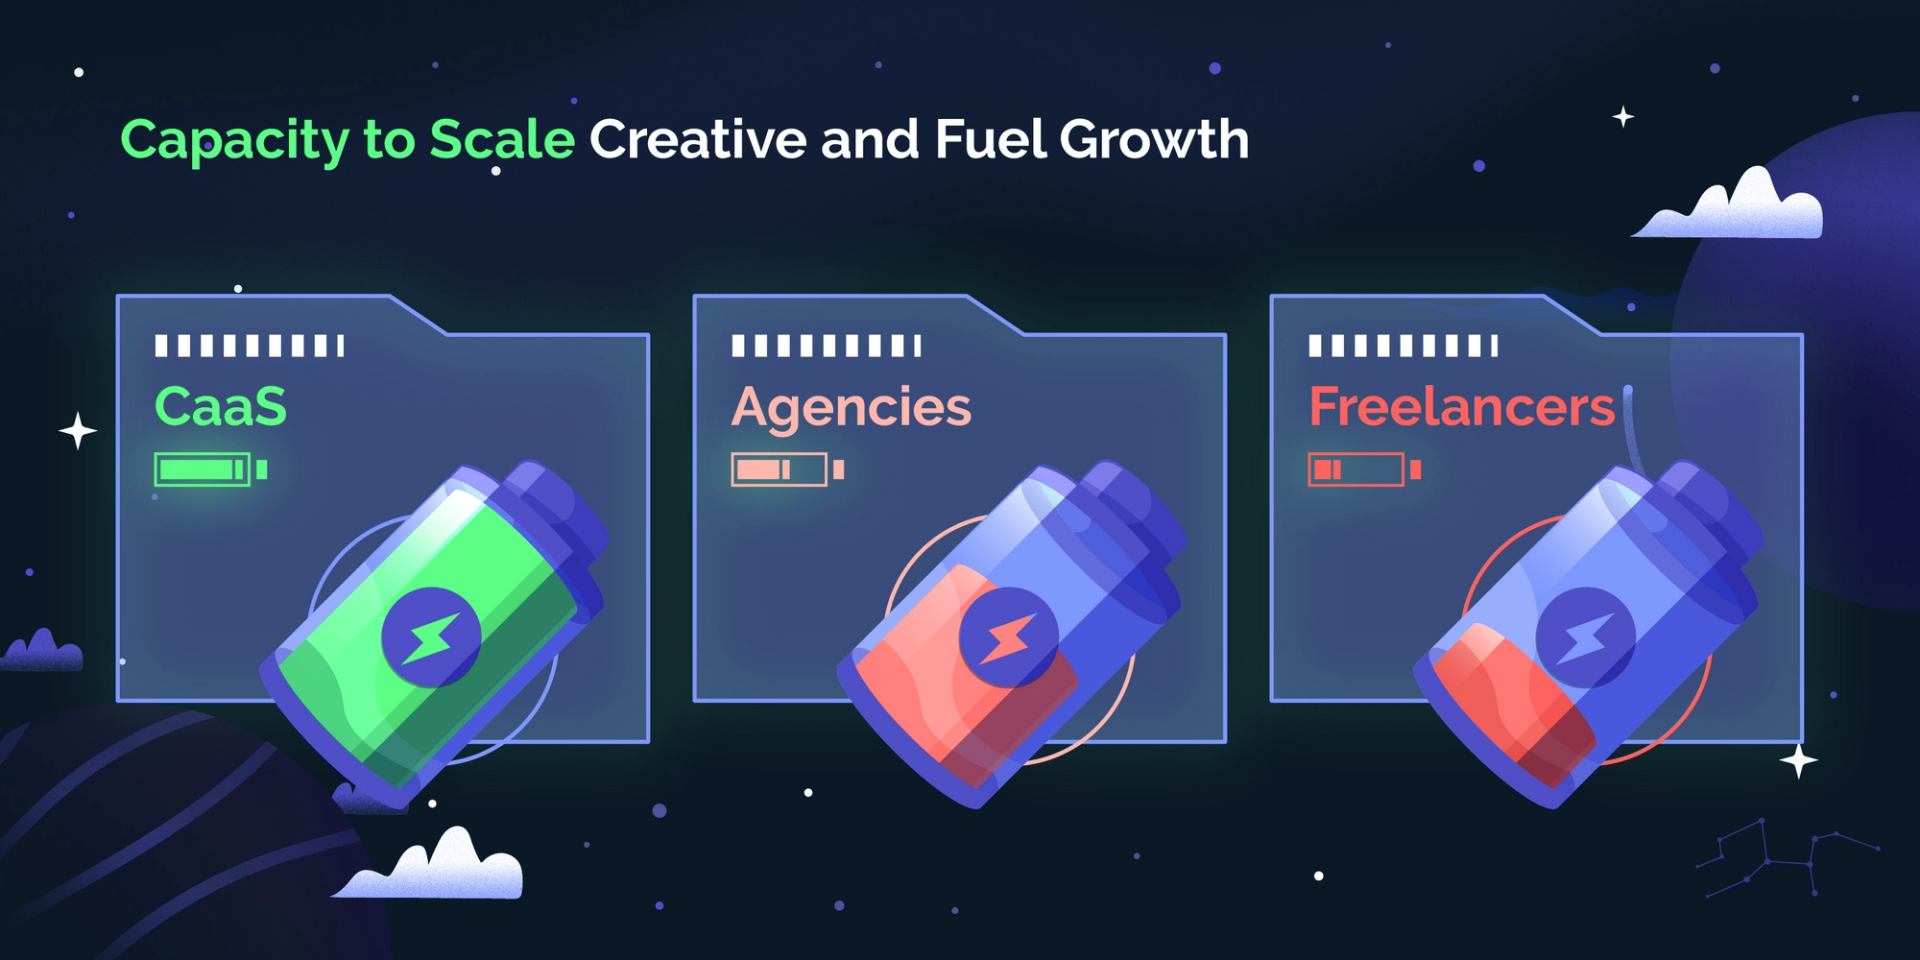 An infographic showing that CaaS is the only solution that can scale creative and fuel growth.